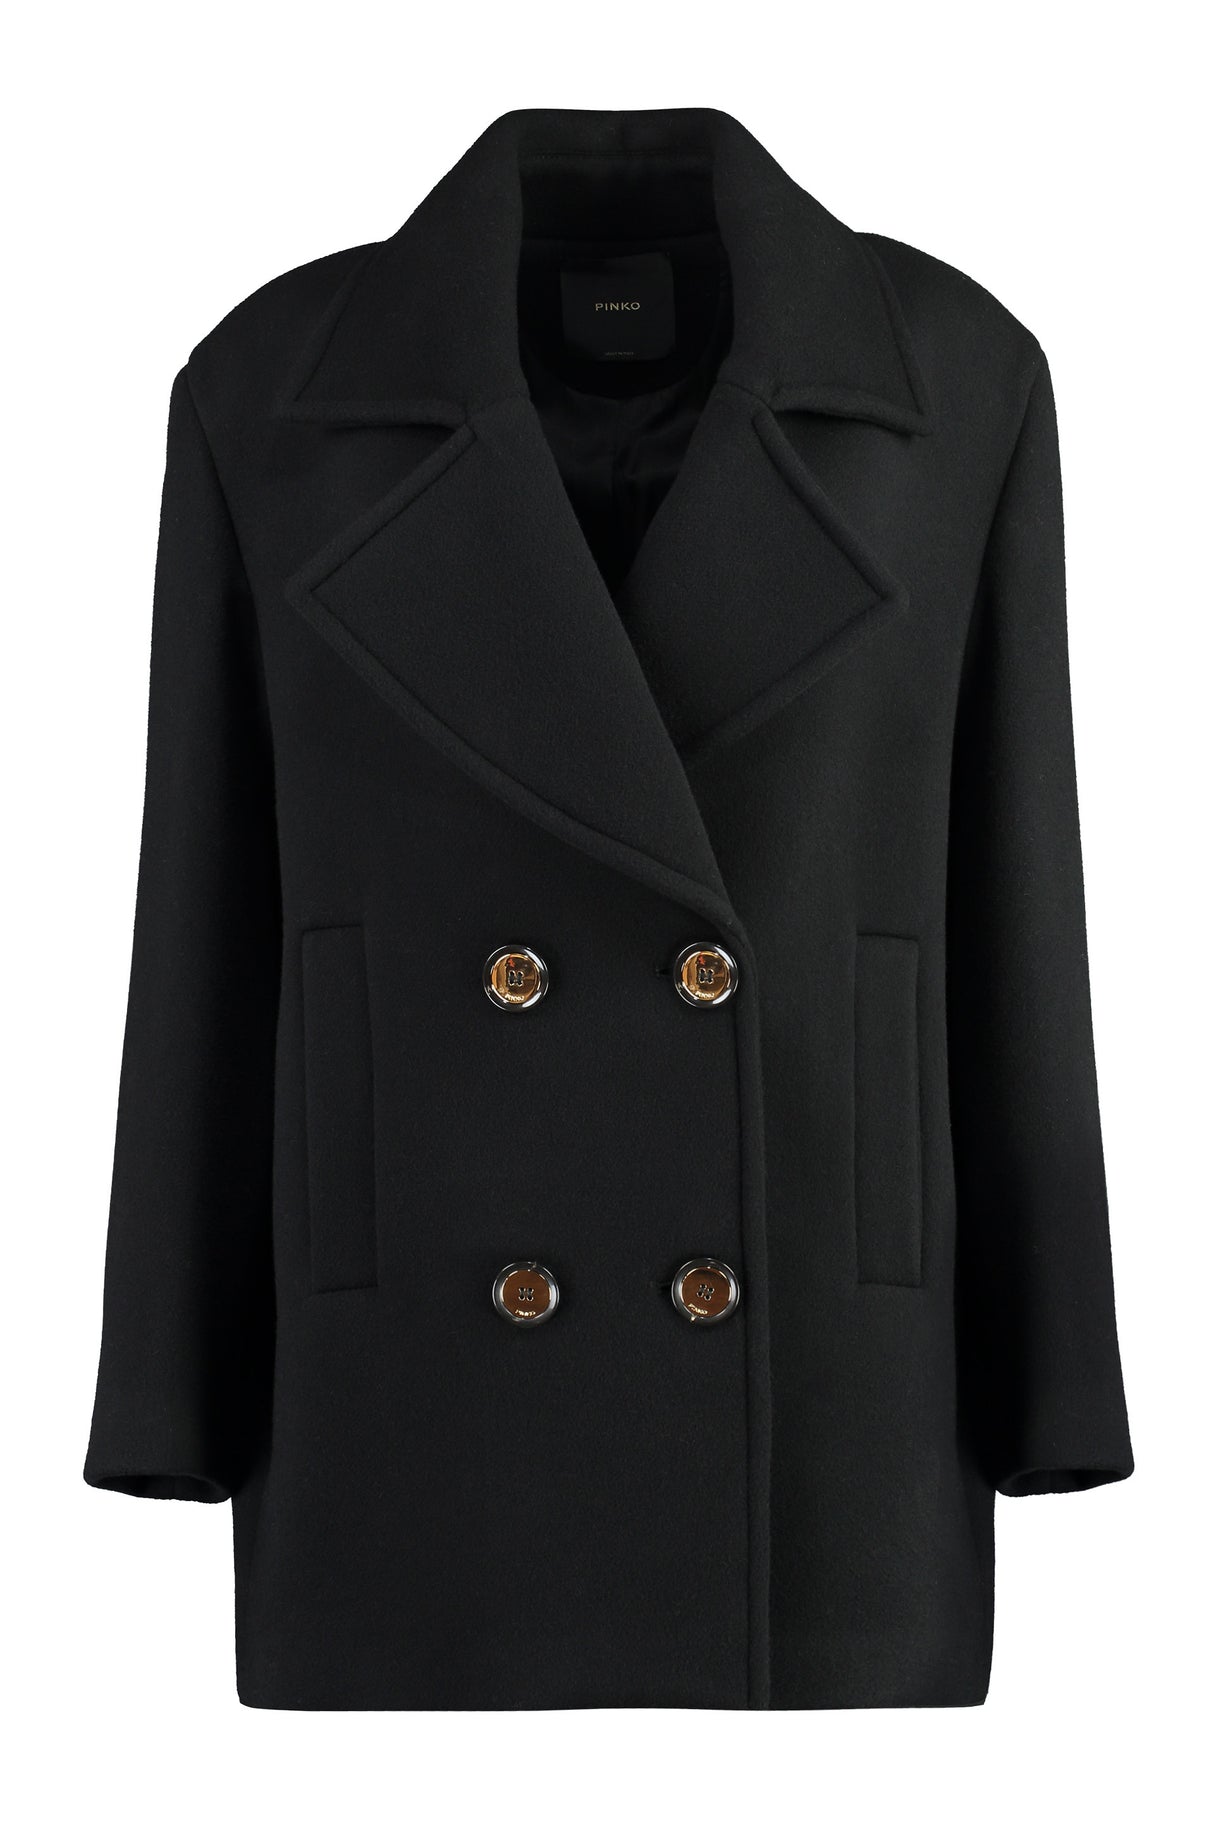 Double-Breasted Wool Jacket with Lapel Collar and Two Front Pockets